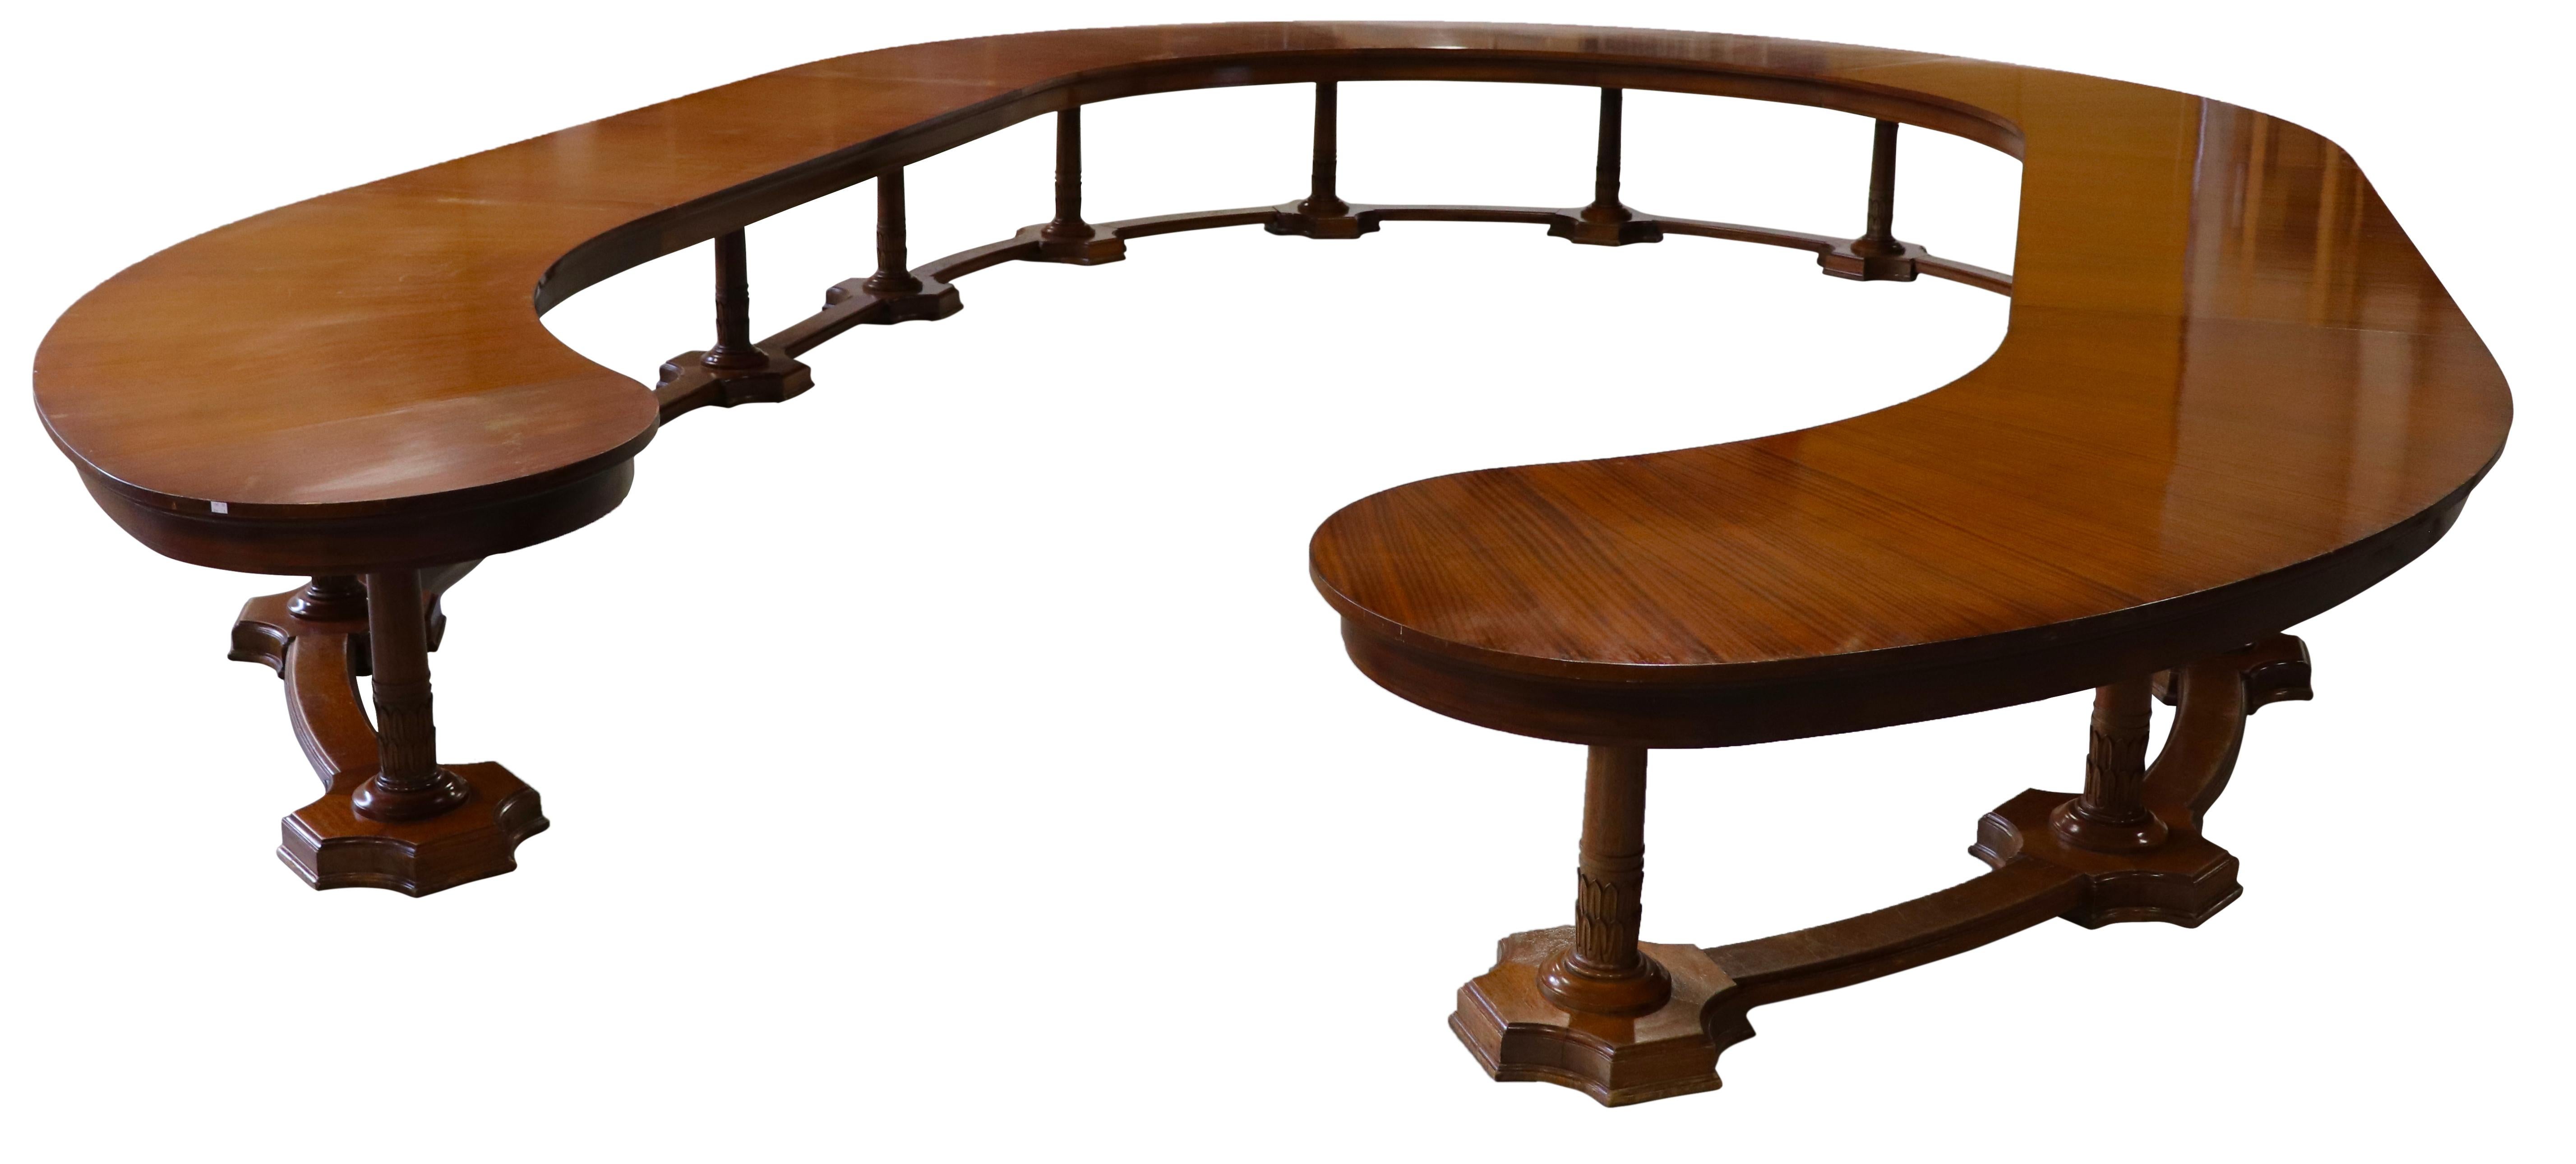 Belgian Mahogany Conference Table, Boardroom Table, circa 1920 In Good Condition For Sale In Sint-Kruis, BE